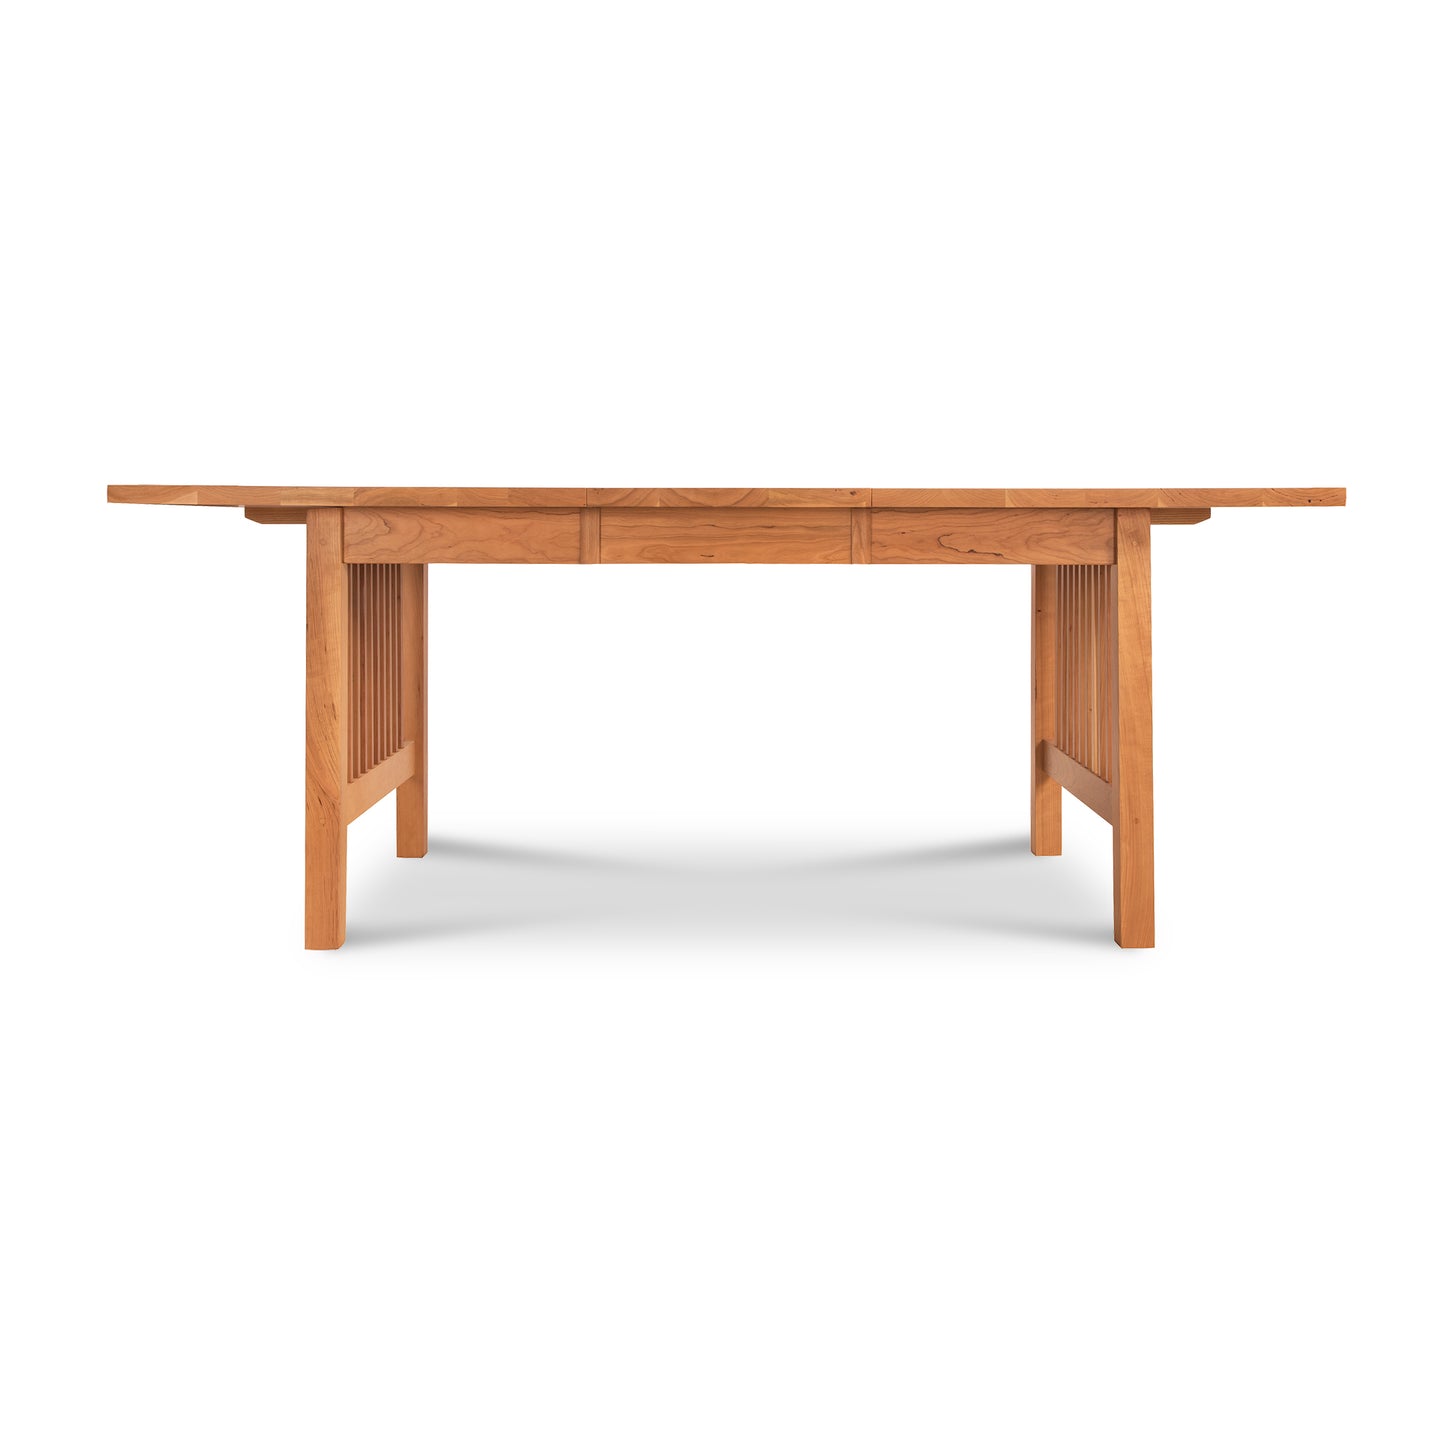 An Lyndon Furniture American Mission Extension dining table crafted from solid natural wood, featuring two convenient drawers for storage.